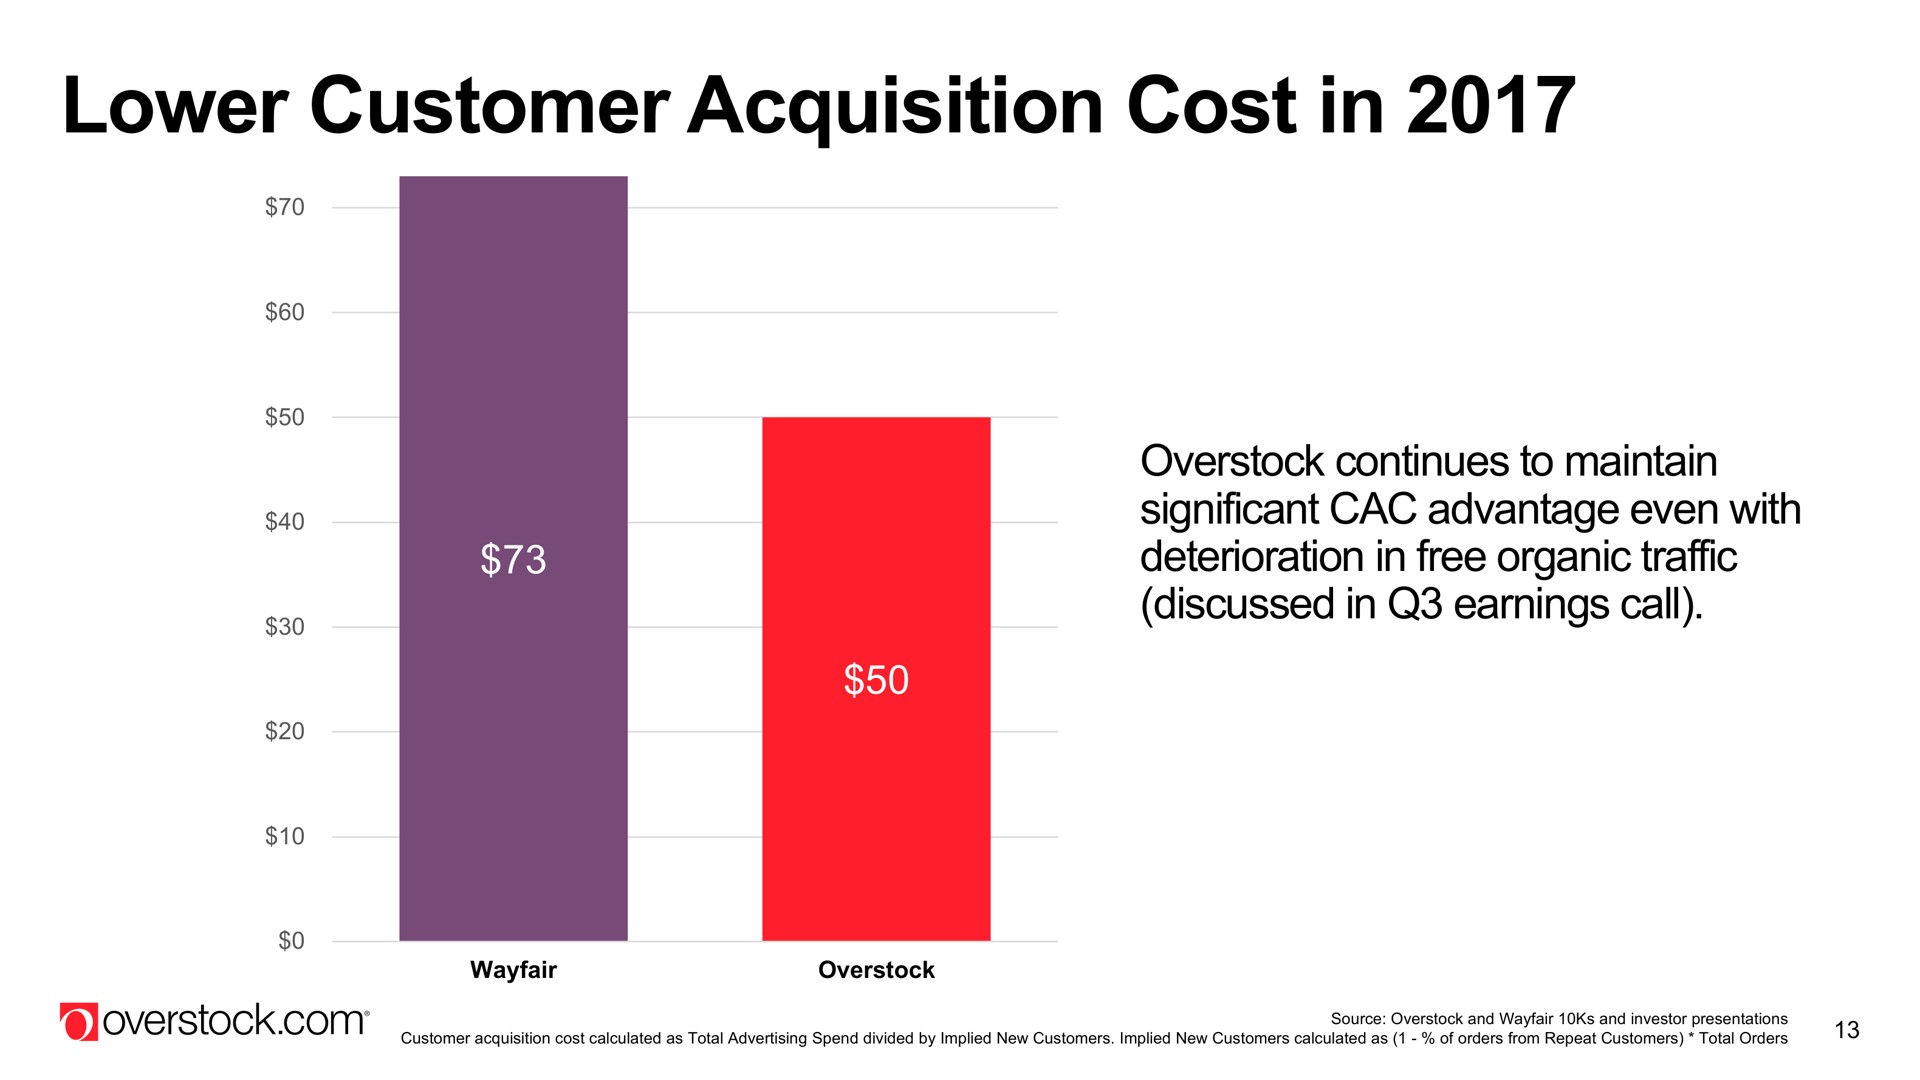 lower customer acquisition cost in overstock continues to maintain | Overstock